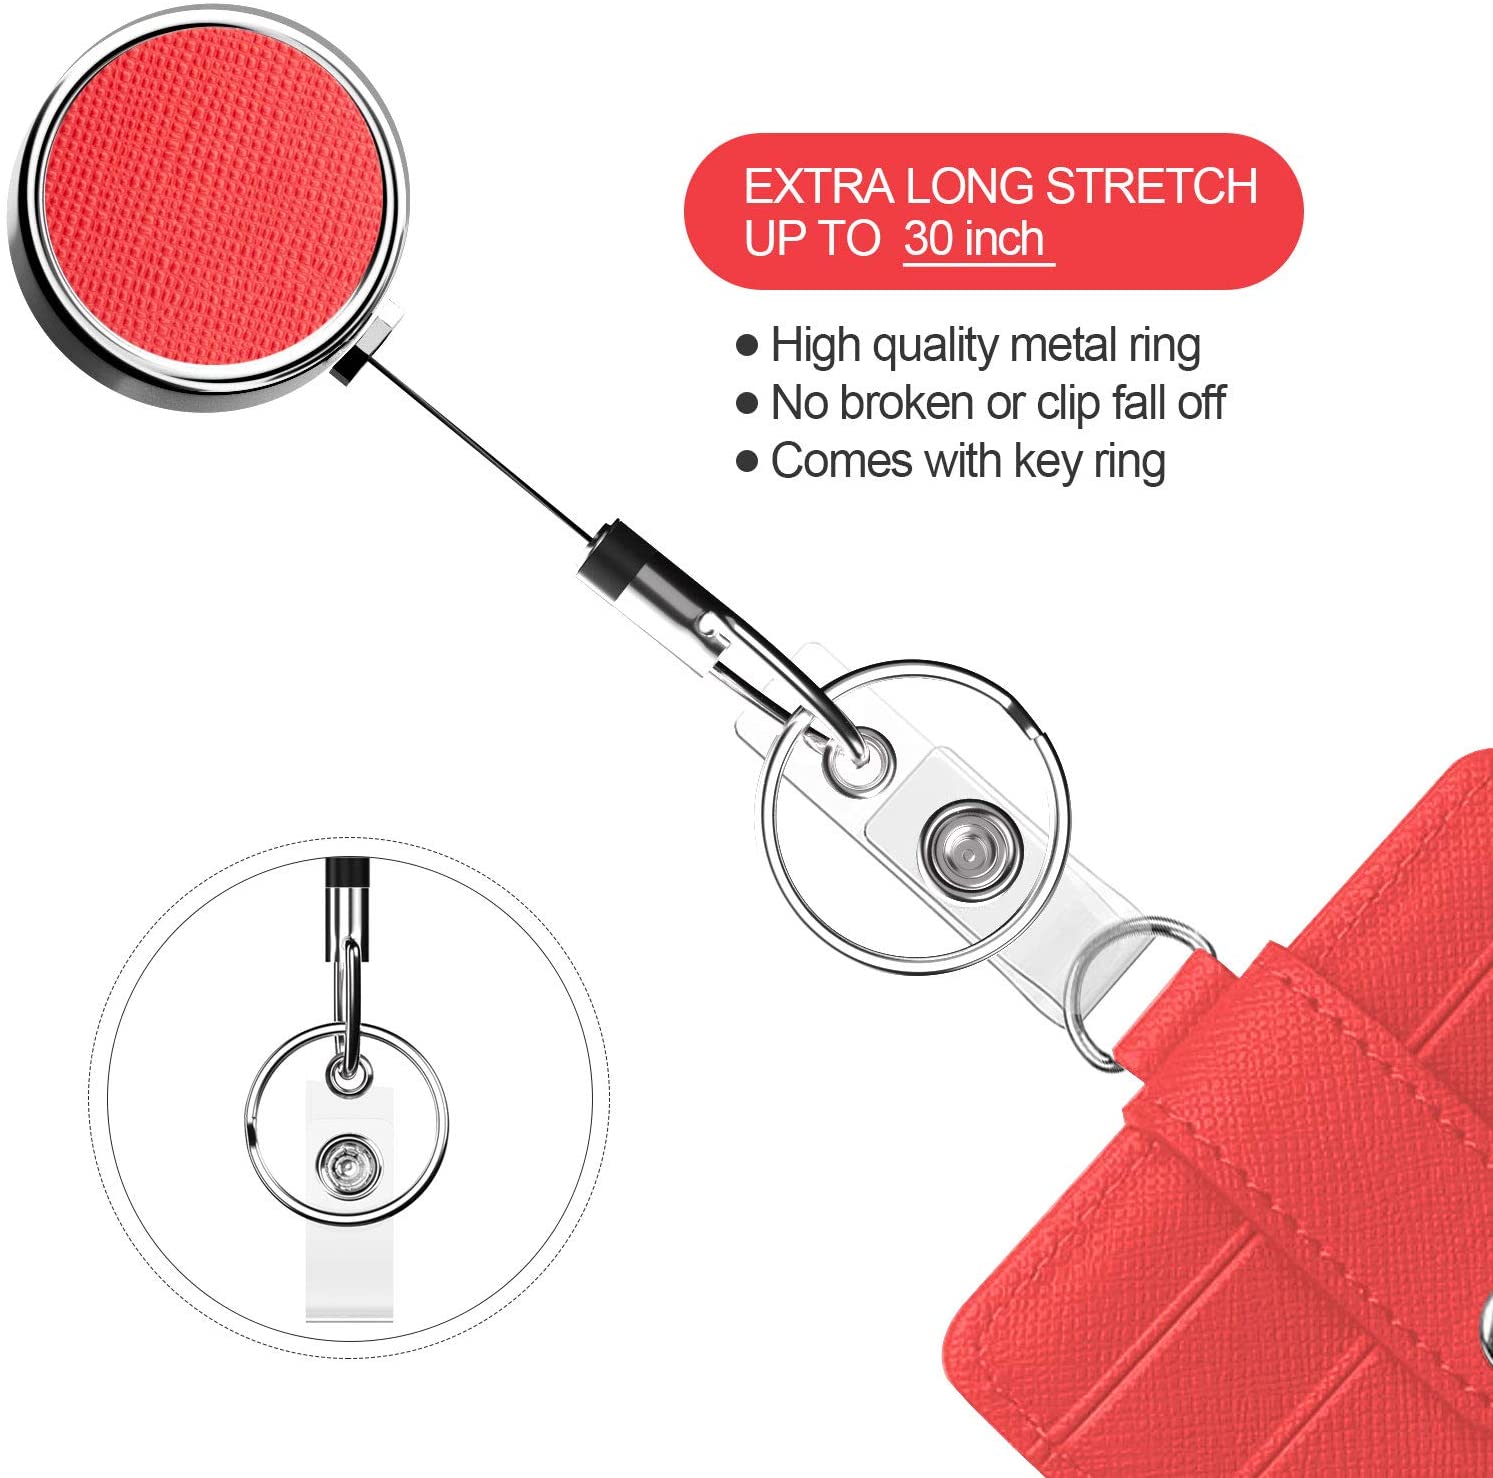 Teskyer Professional Retractable ID Card Badge Holder Reel with